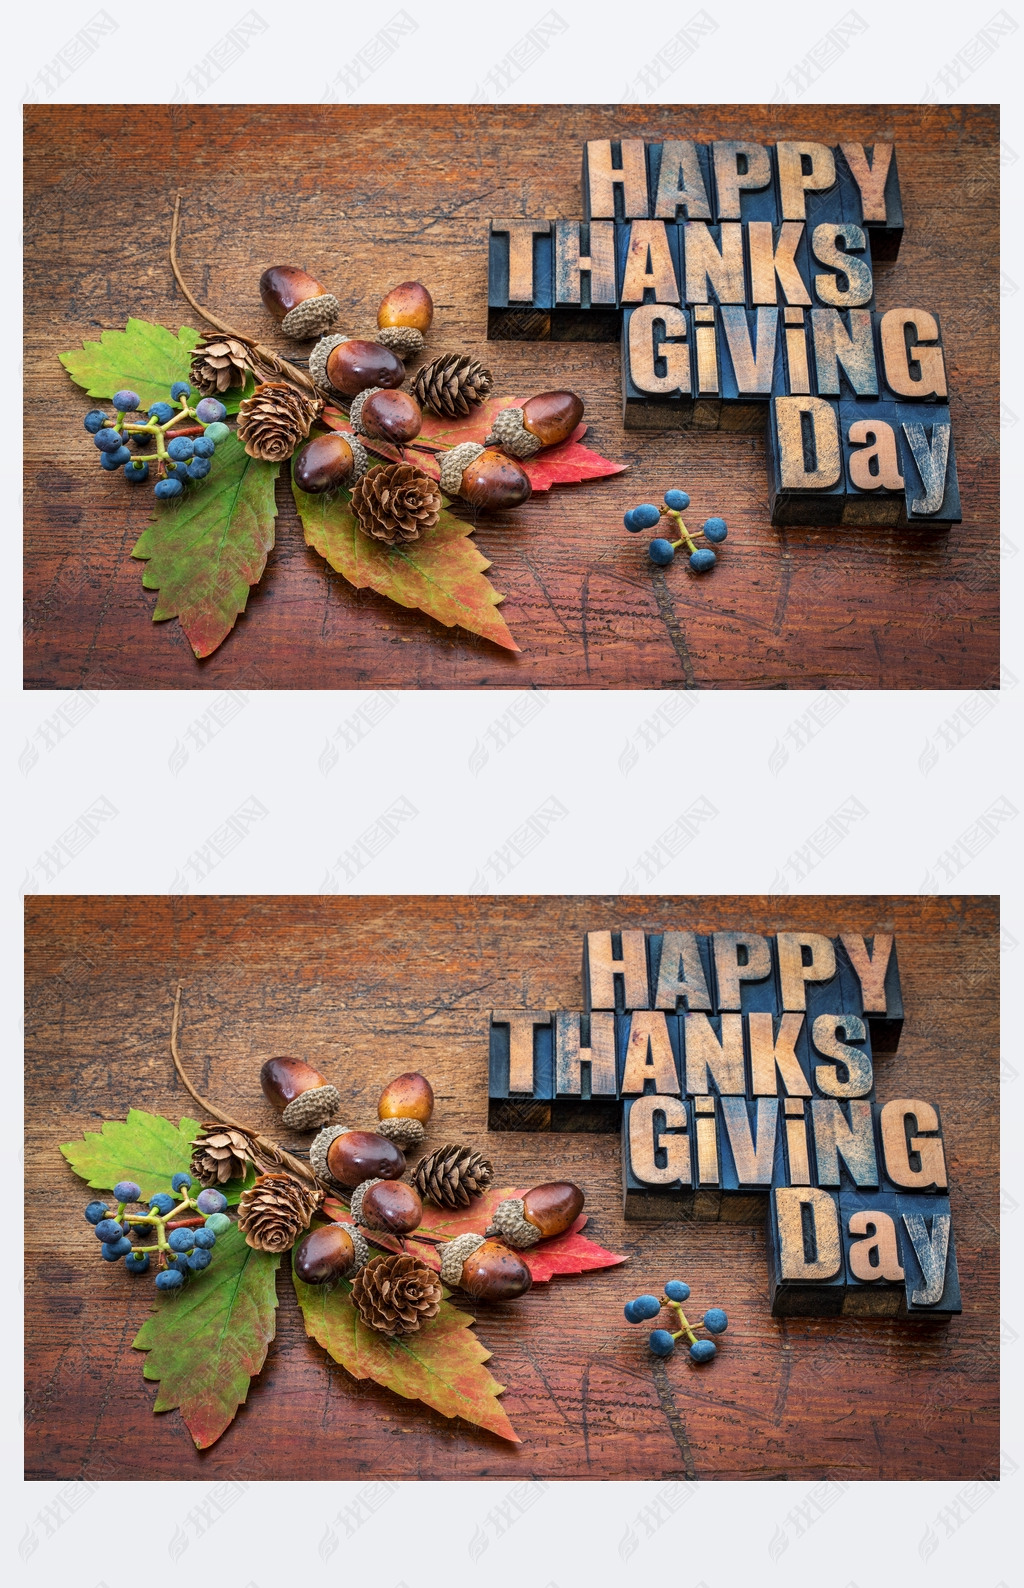 Happy Thanksgiving Day in wood type